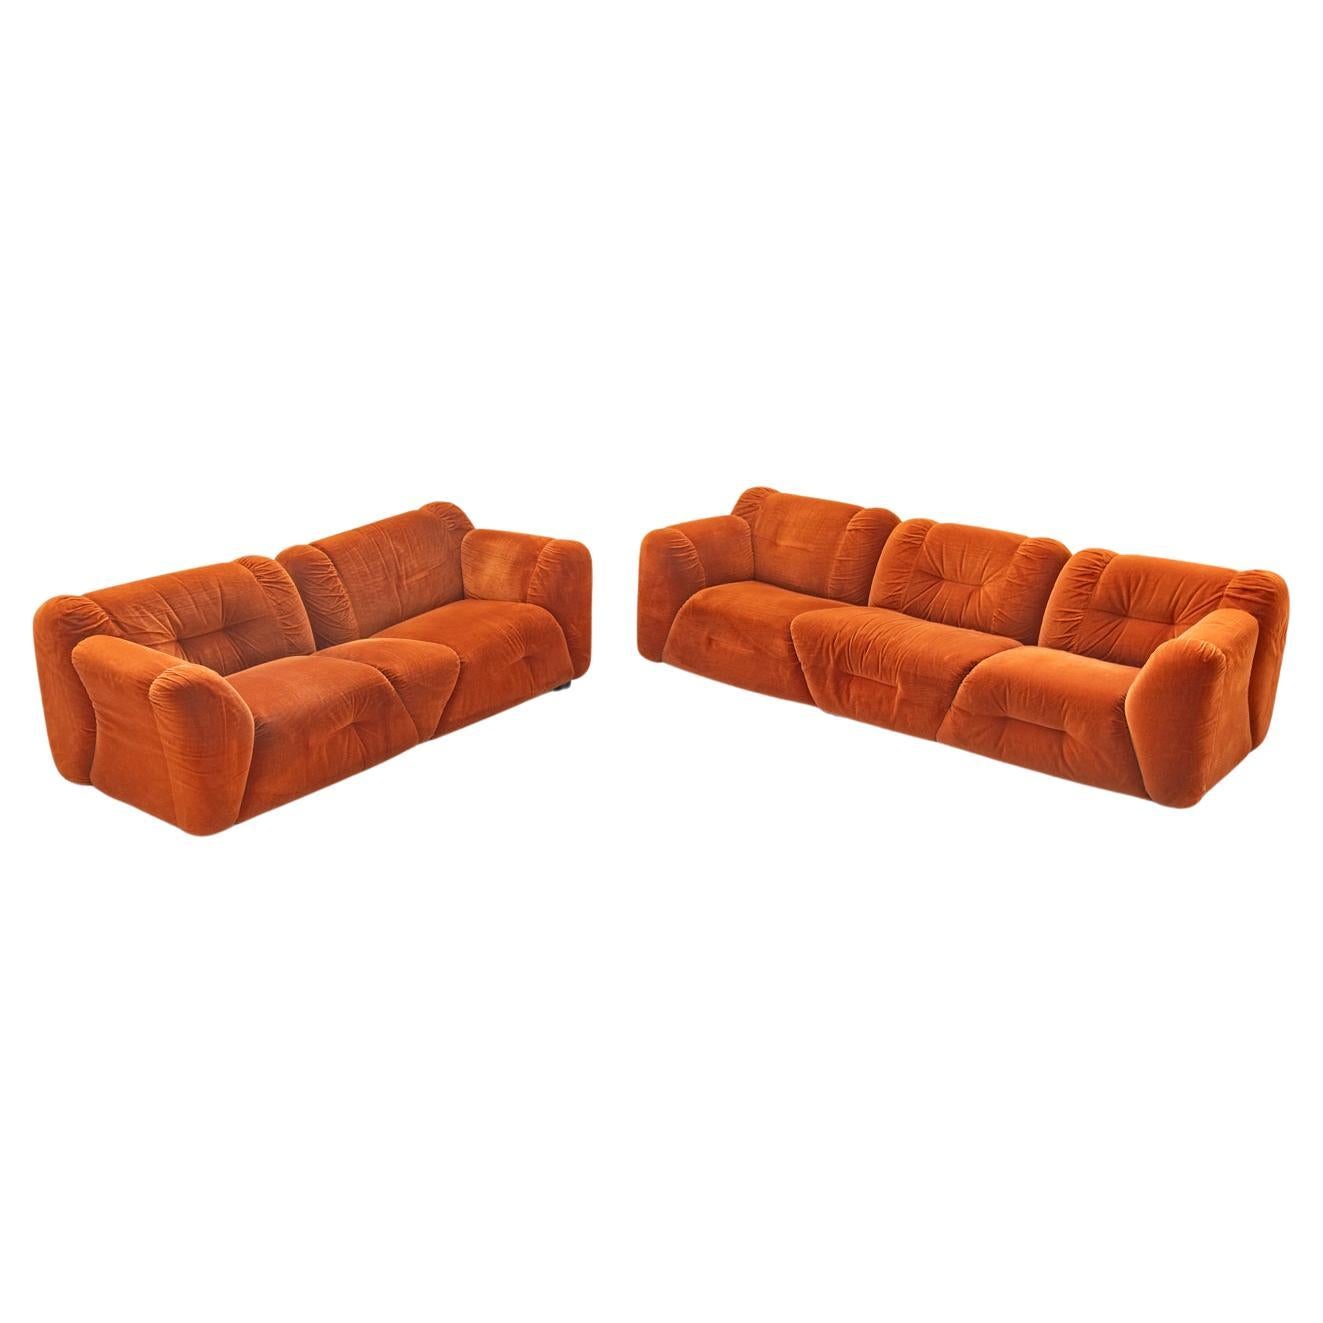 Orange chenille sofas, two and three seater, set of 2, 1970s For Sale